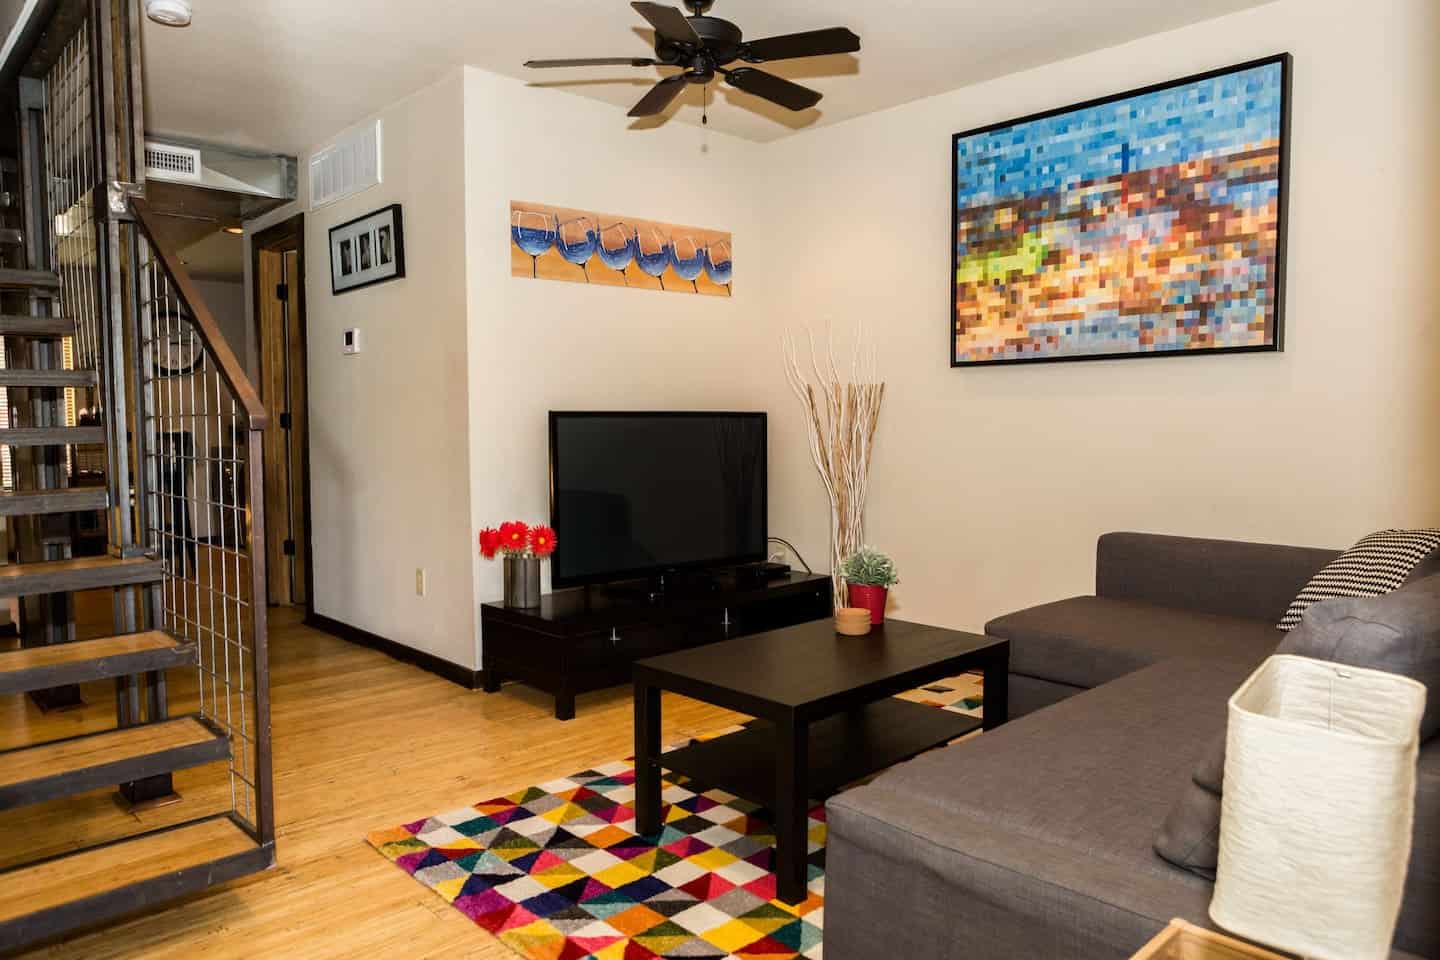 Image of Airbnb rental in Waco